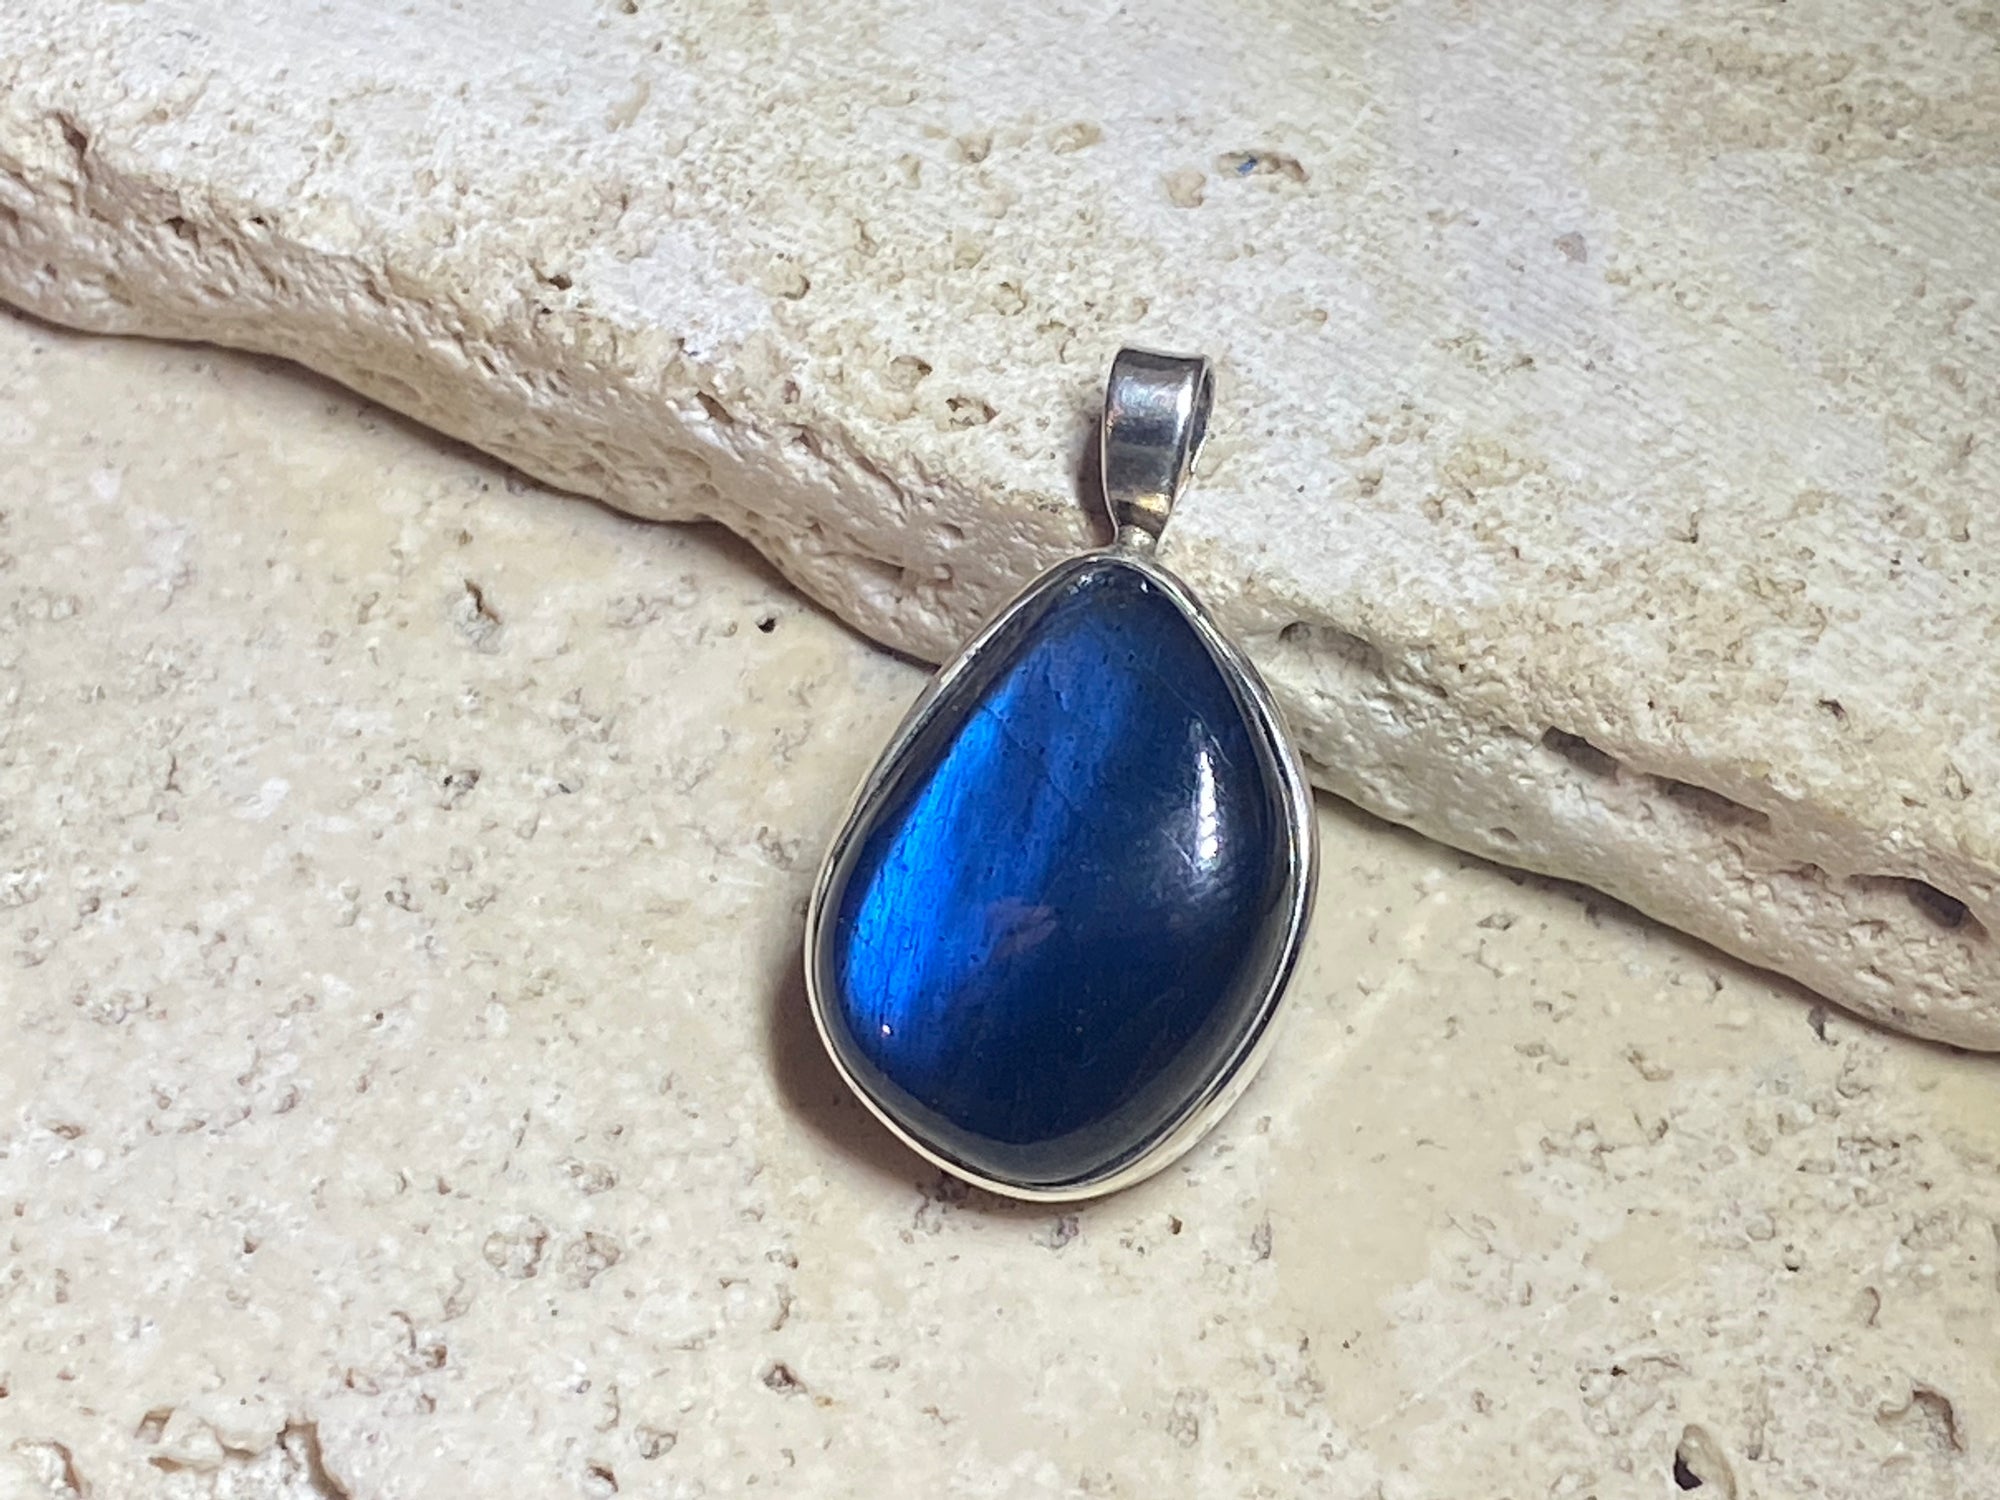 Stunning free form labradorite pendant set in sterling silver with a generous bail to take a large chain or cord. A quality stone with dark blue colour.